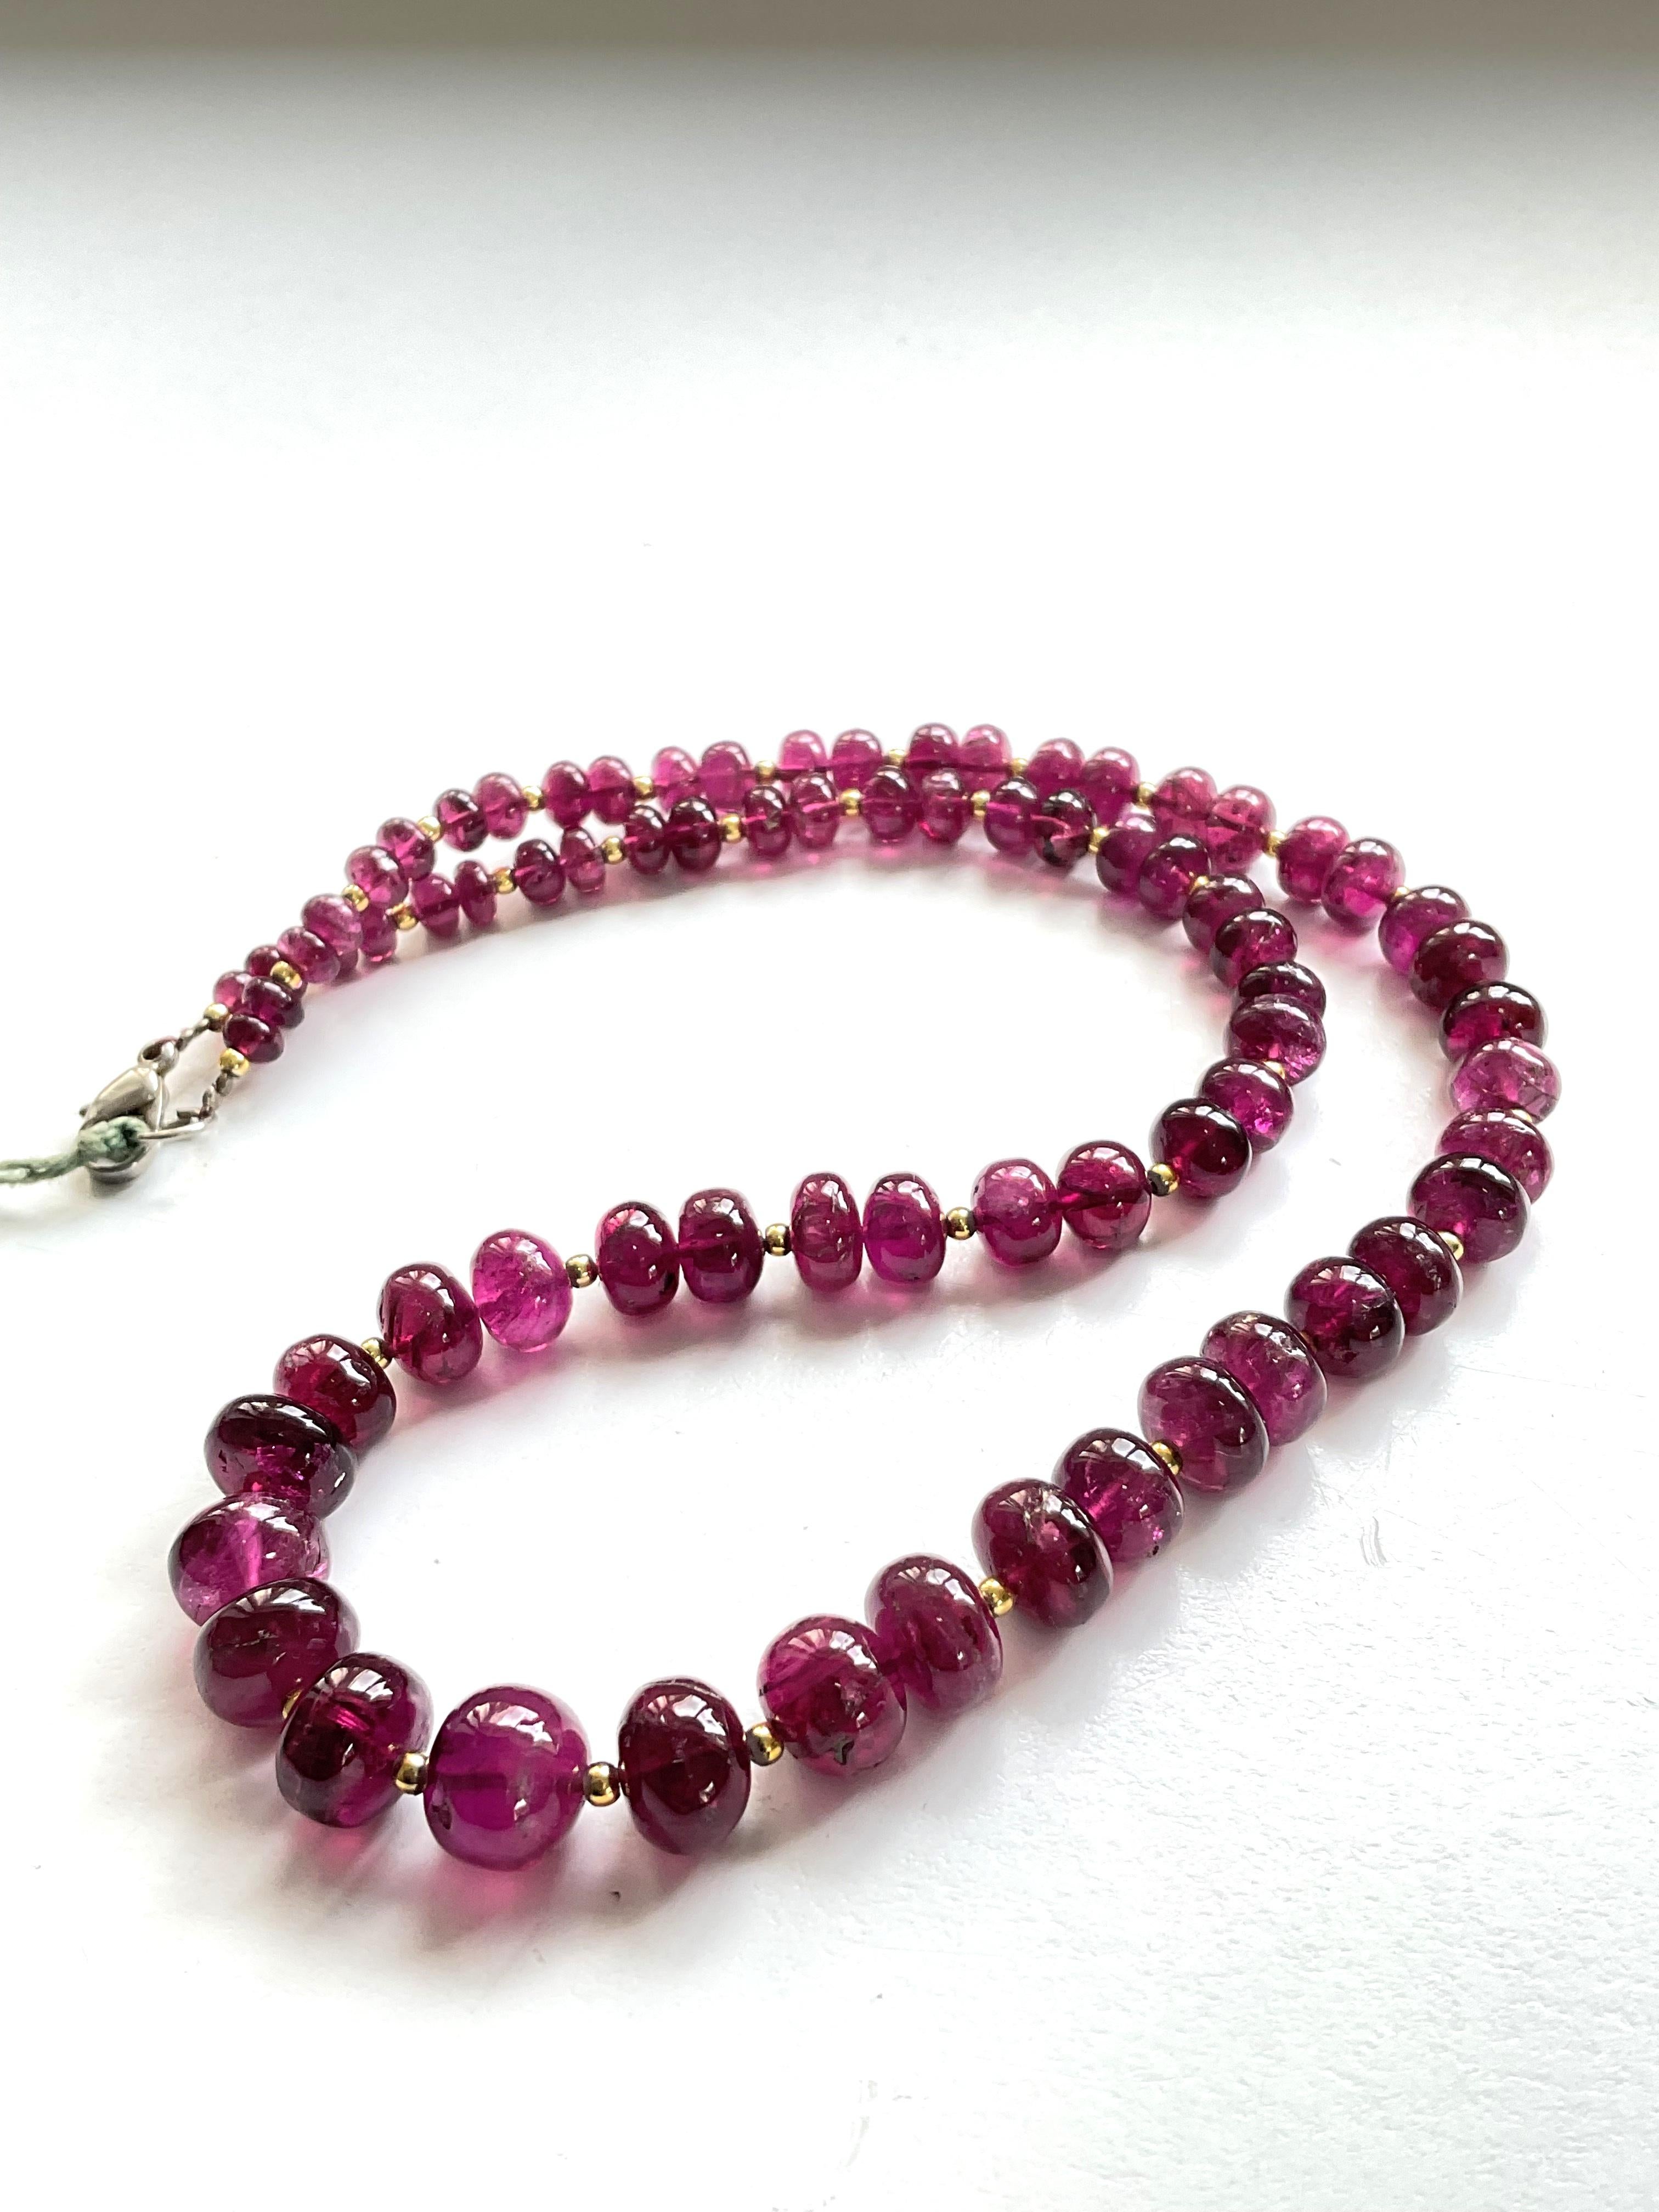 163.00 Carats Rubellite Tourmaline Plain Beads For Top Fine Jewelry Natural Gem For Sale 2